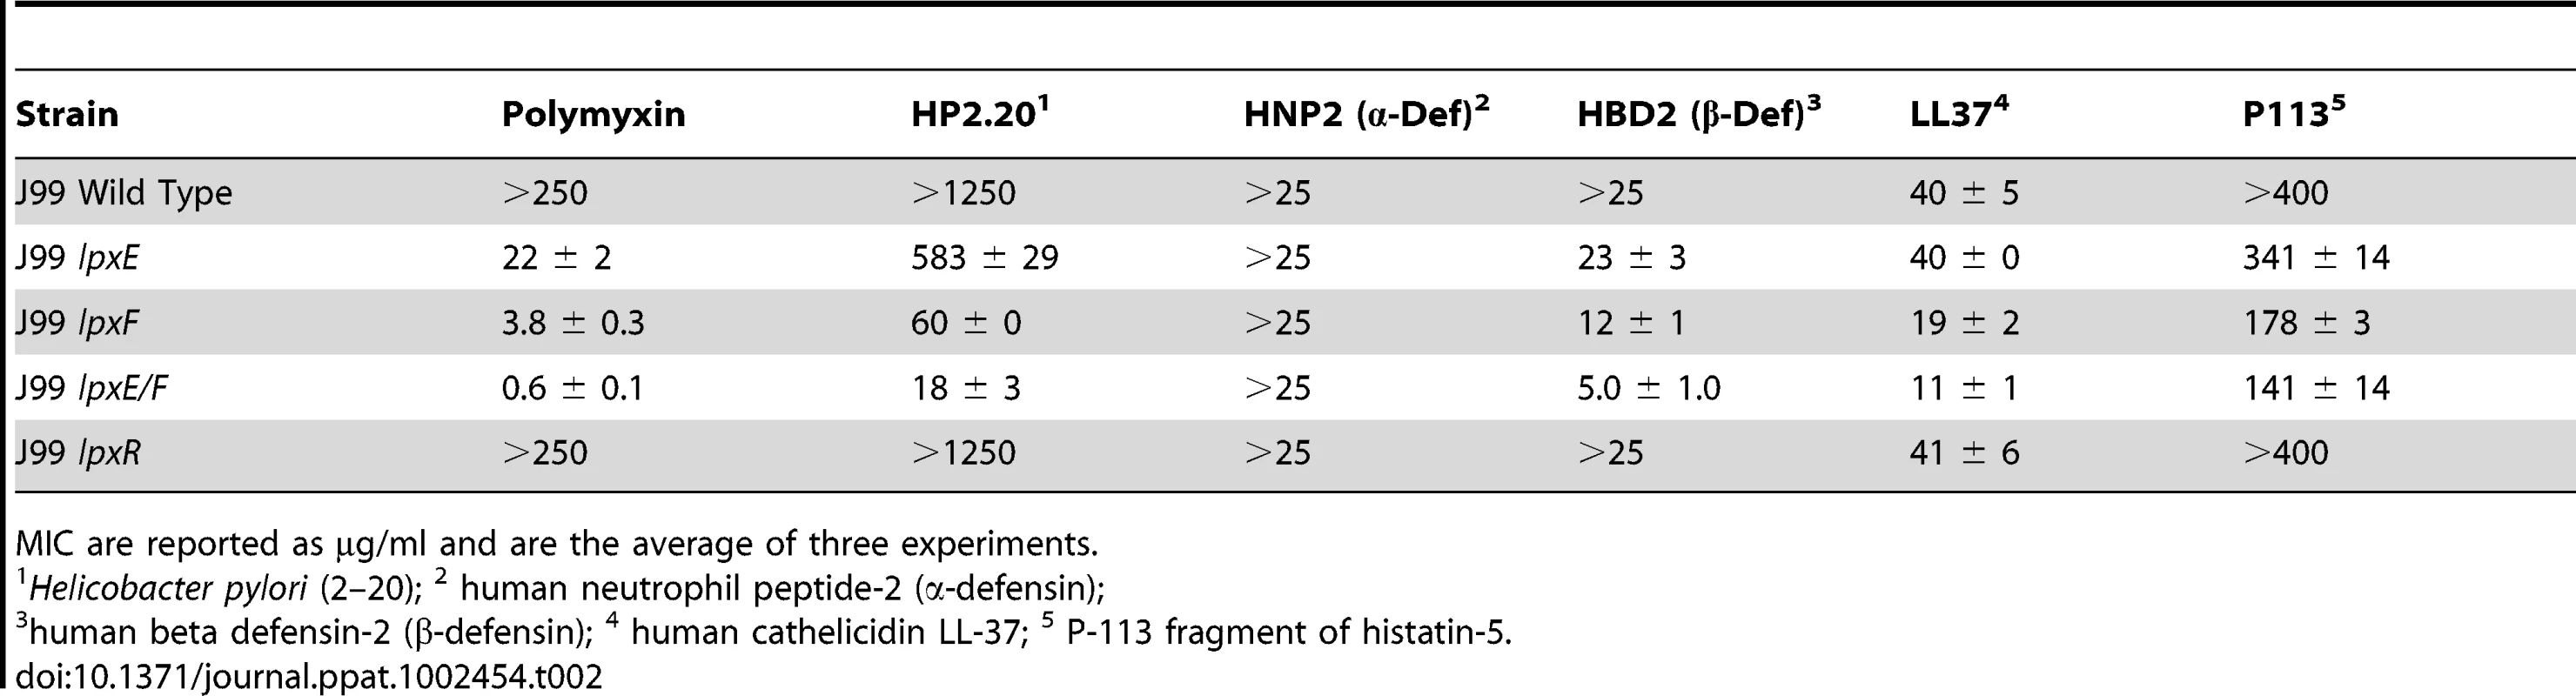 Minimal Inhibitory Concentrations (MIC) of cationic antimicrobial peptides against <i>H. pylori</i> strains.